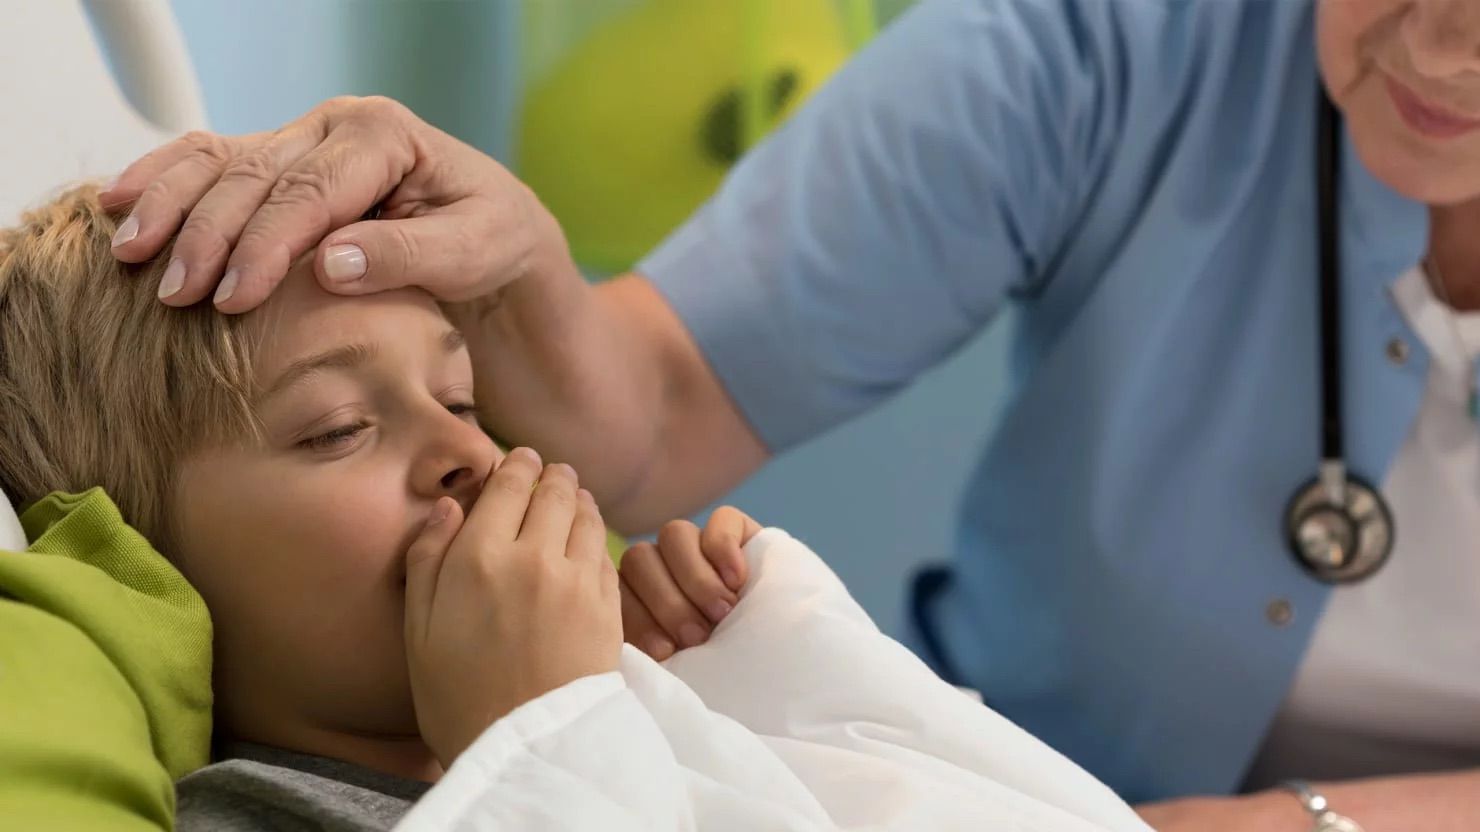 CDC Whooping Cough Outbreak Caused By Vaccinated Children